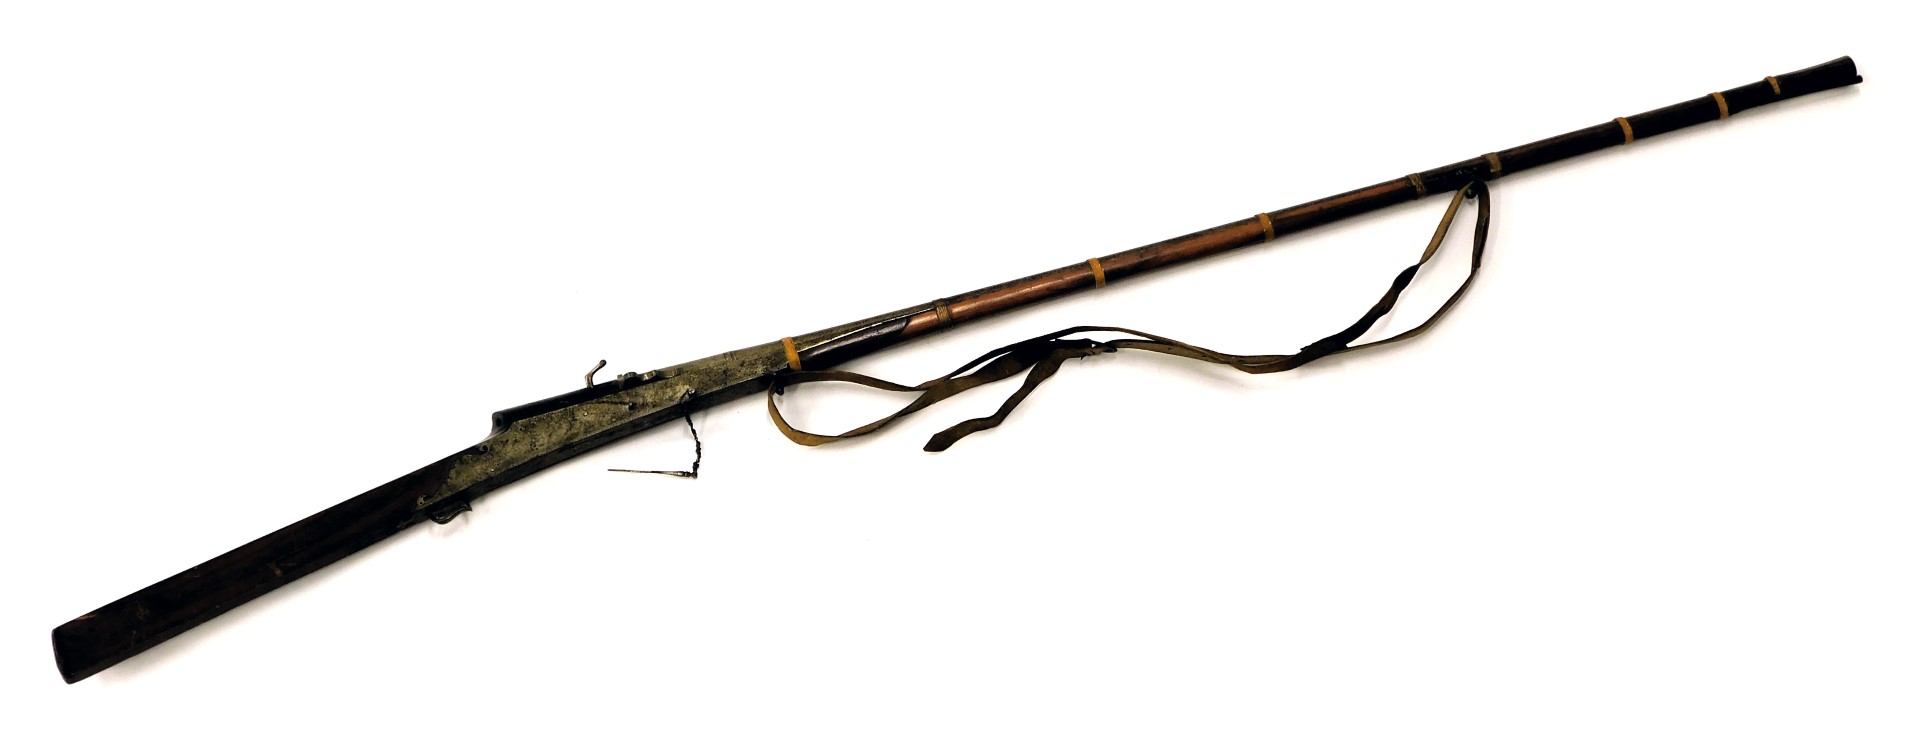 A 19thC Indian matchlock musket, with slightly flared muzzle, ram rod and leather sling, the barrel